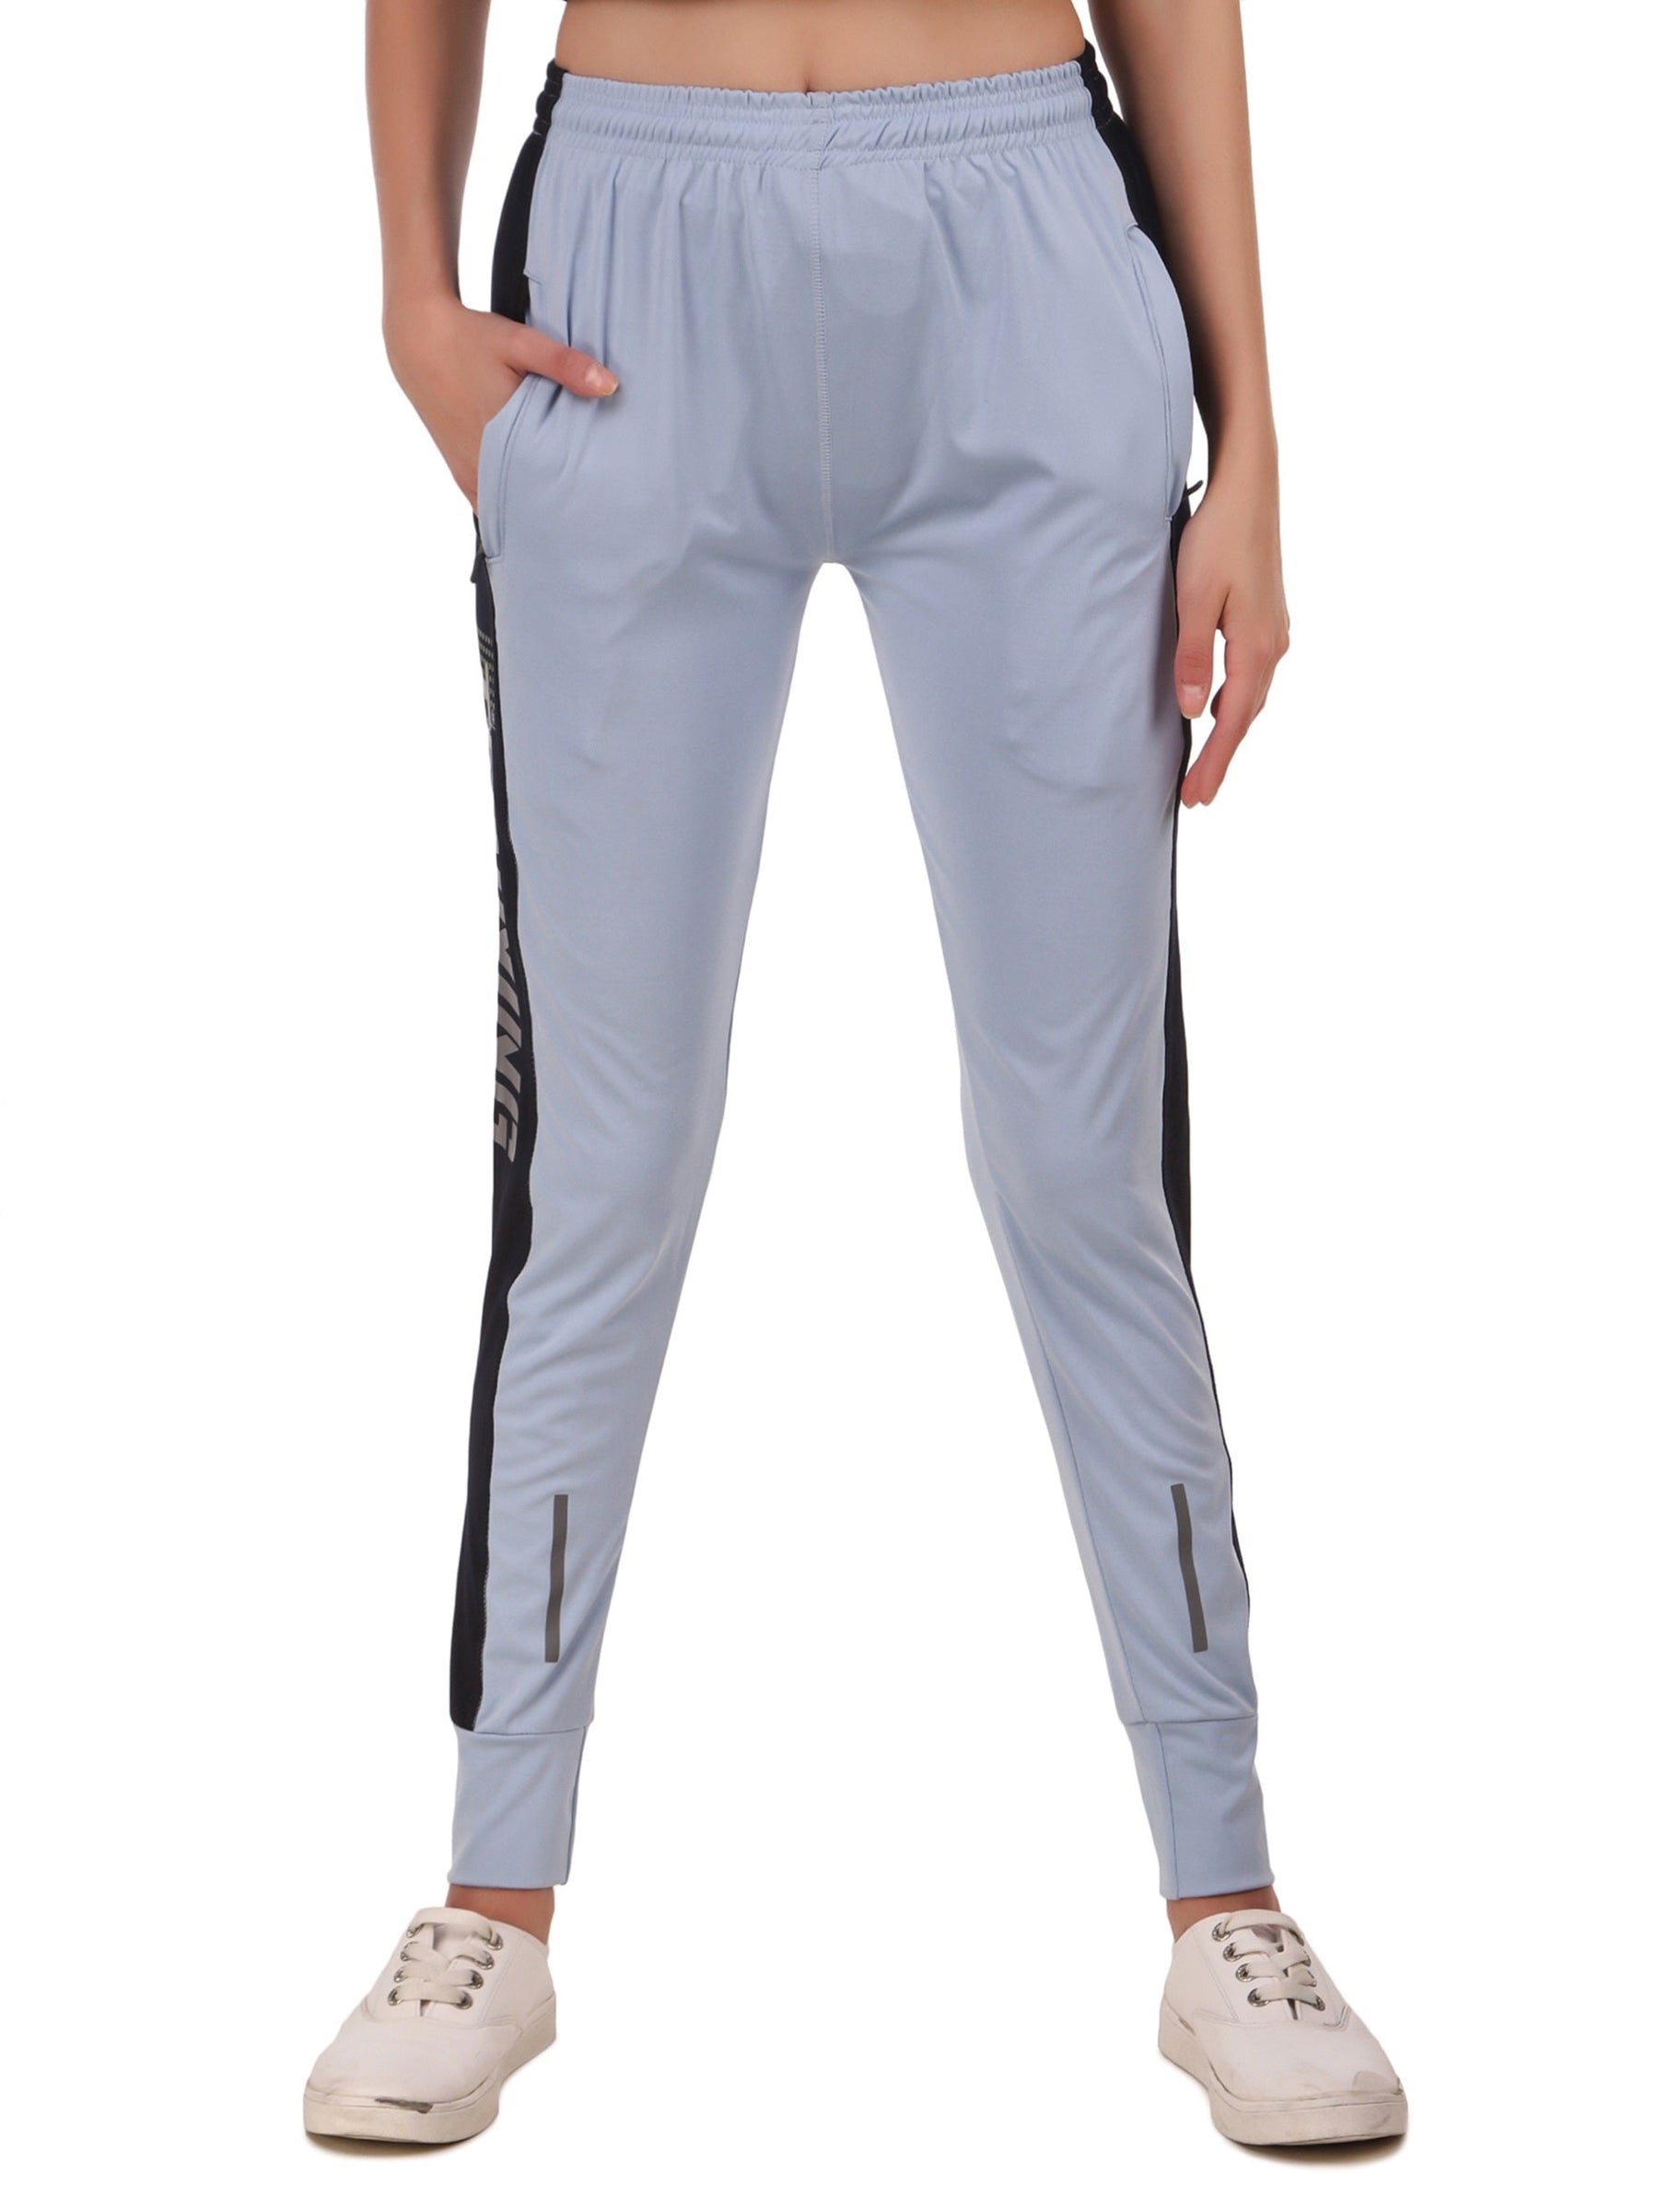 Women's Stretchable Lycra Joggers Track Pants with 2 Zippered Pockets for Gym, Yoga, Workout and Casual Wear